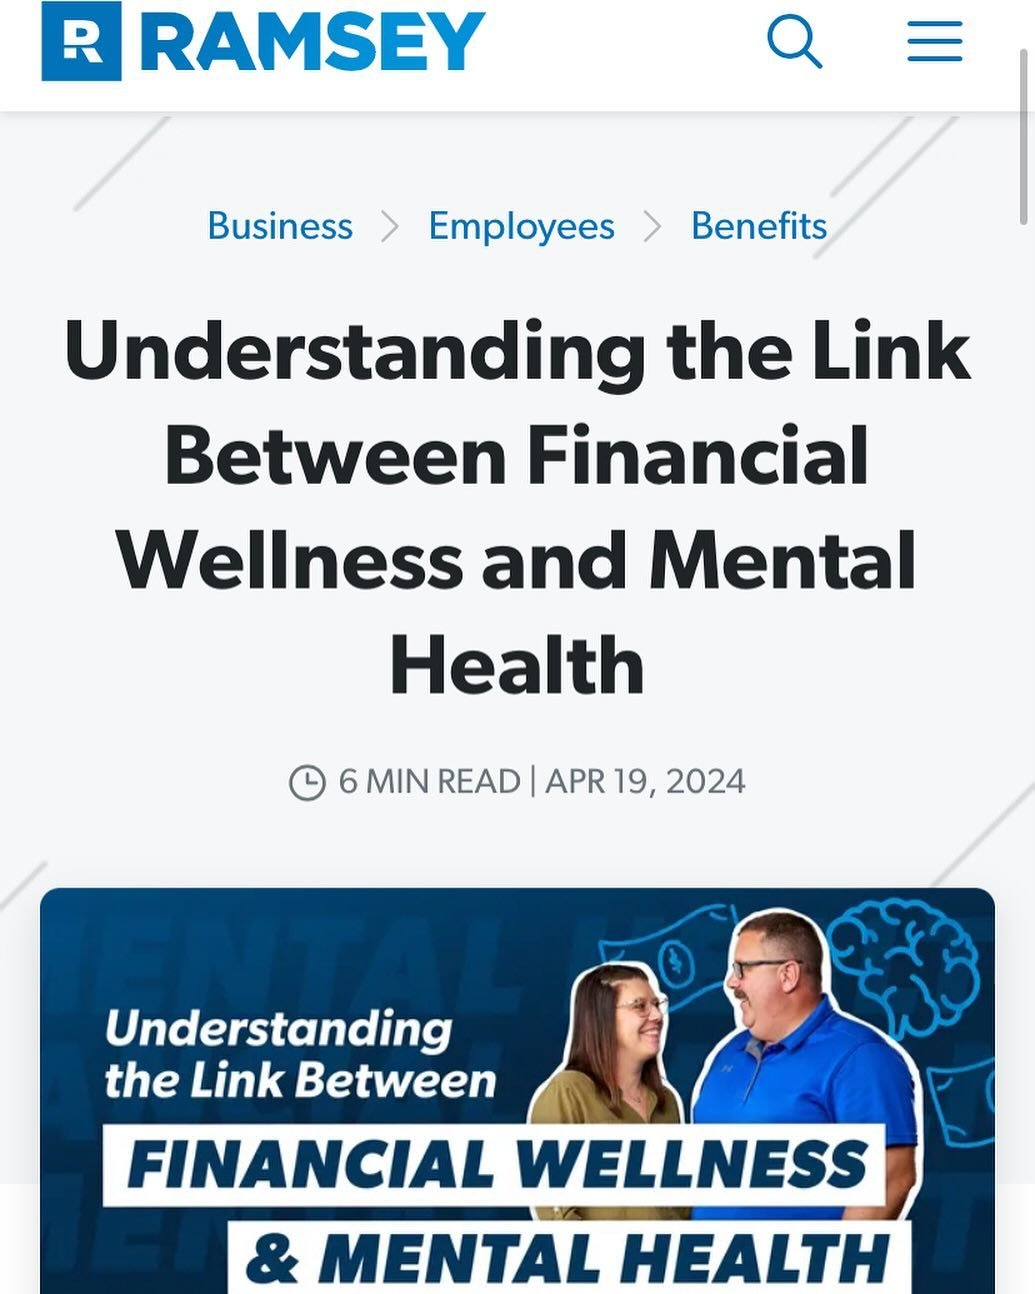 Look who is trying to get into corporate financial wellness by pretending to care about employee mental health 🙄

#financialwellness #mentalhealth #daveramsey